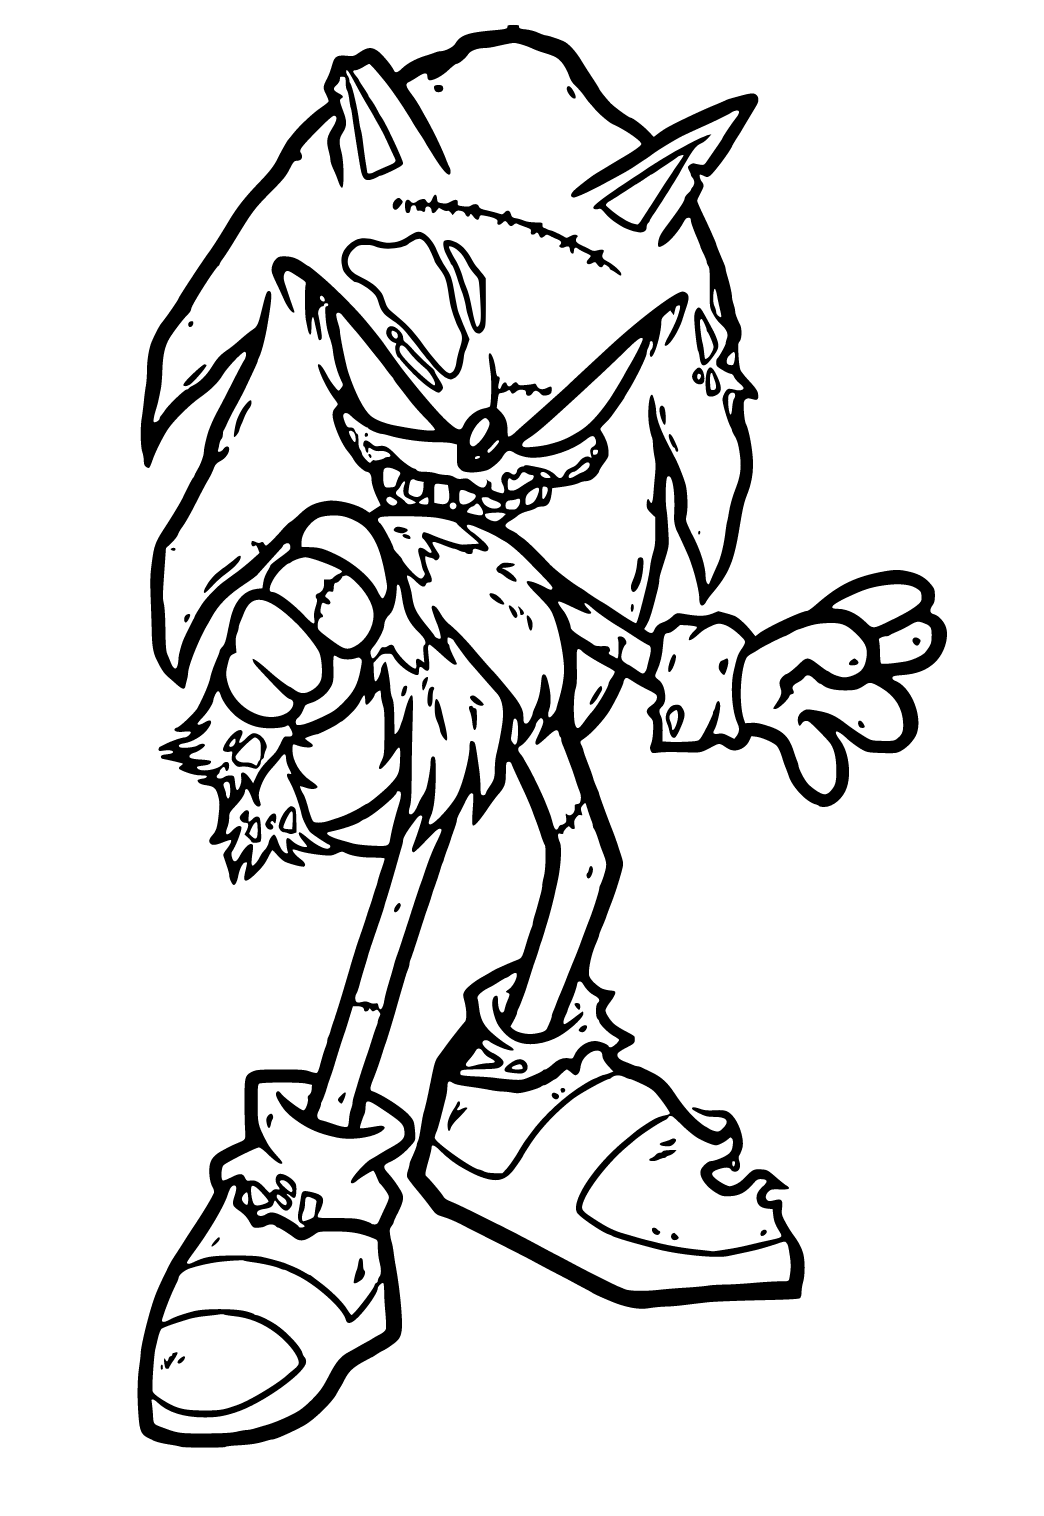 Free printable sonic exe monster coloring page for adults and kids